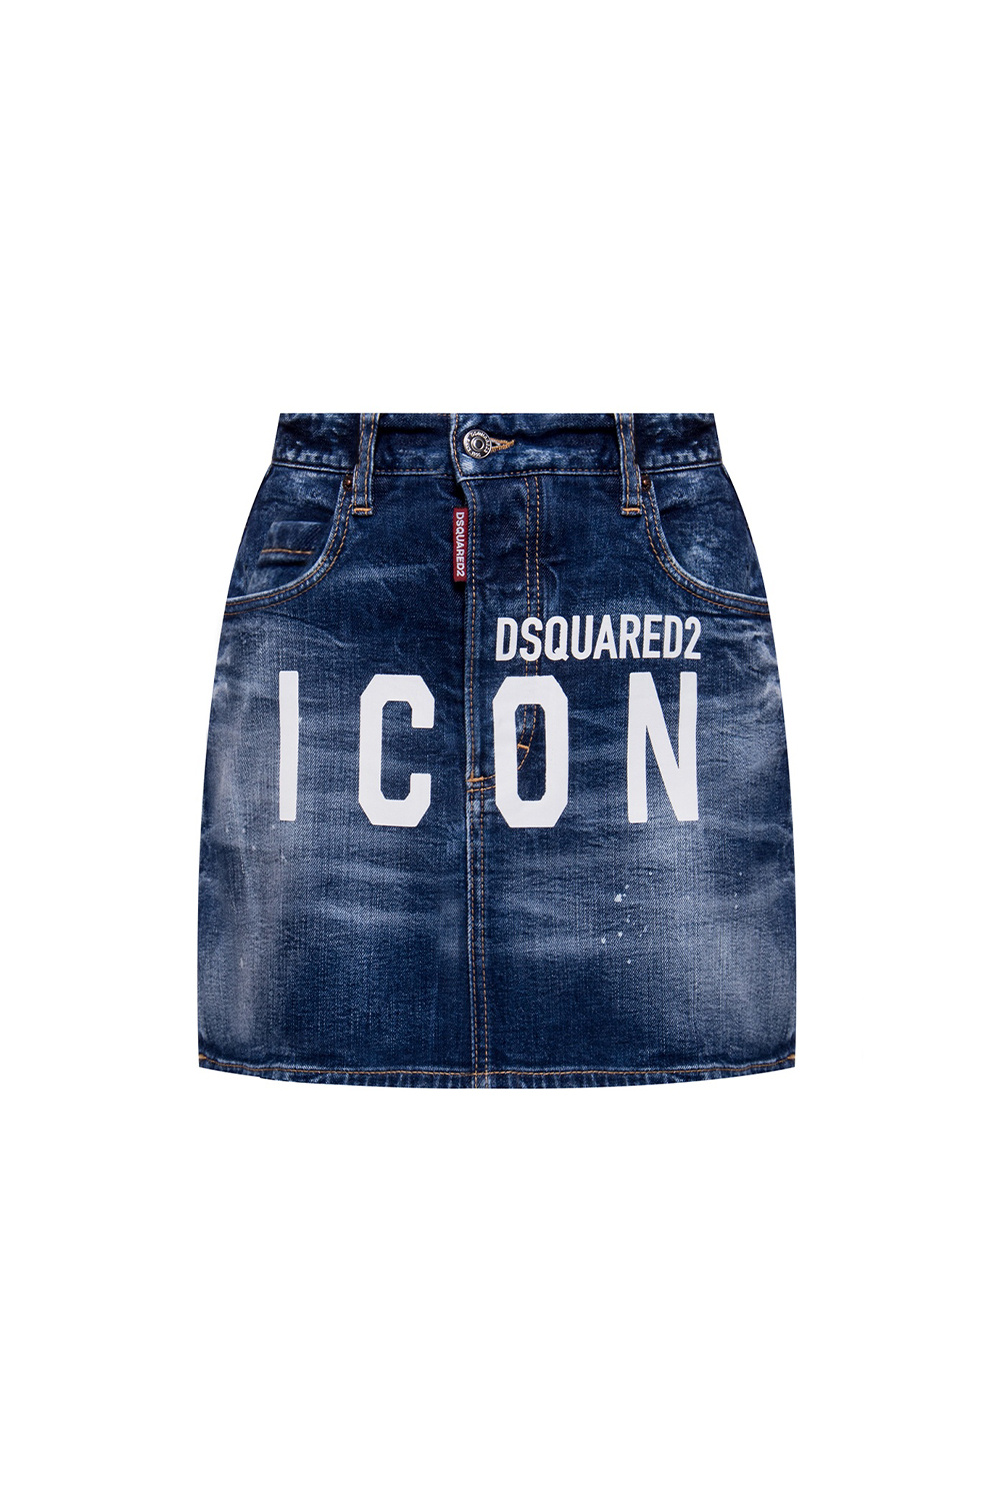 Dsquared2 A history of the brand